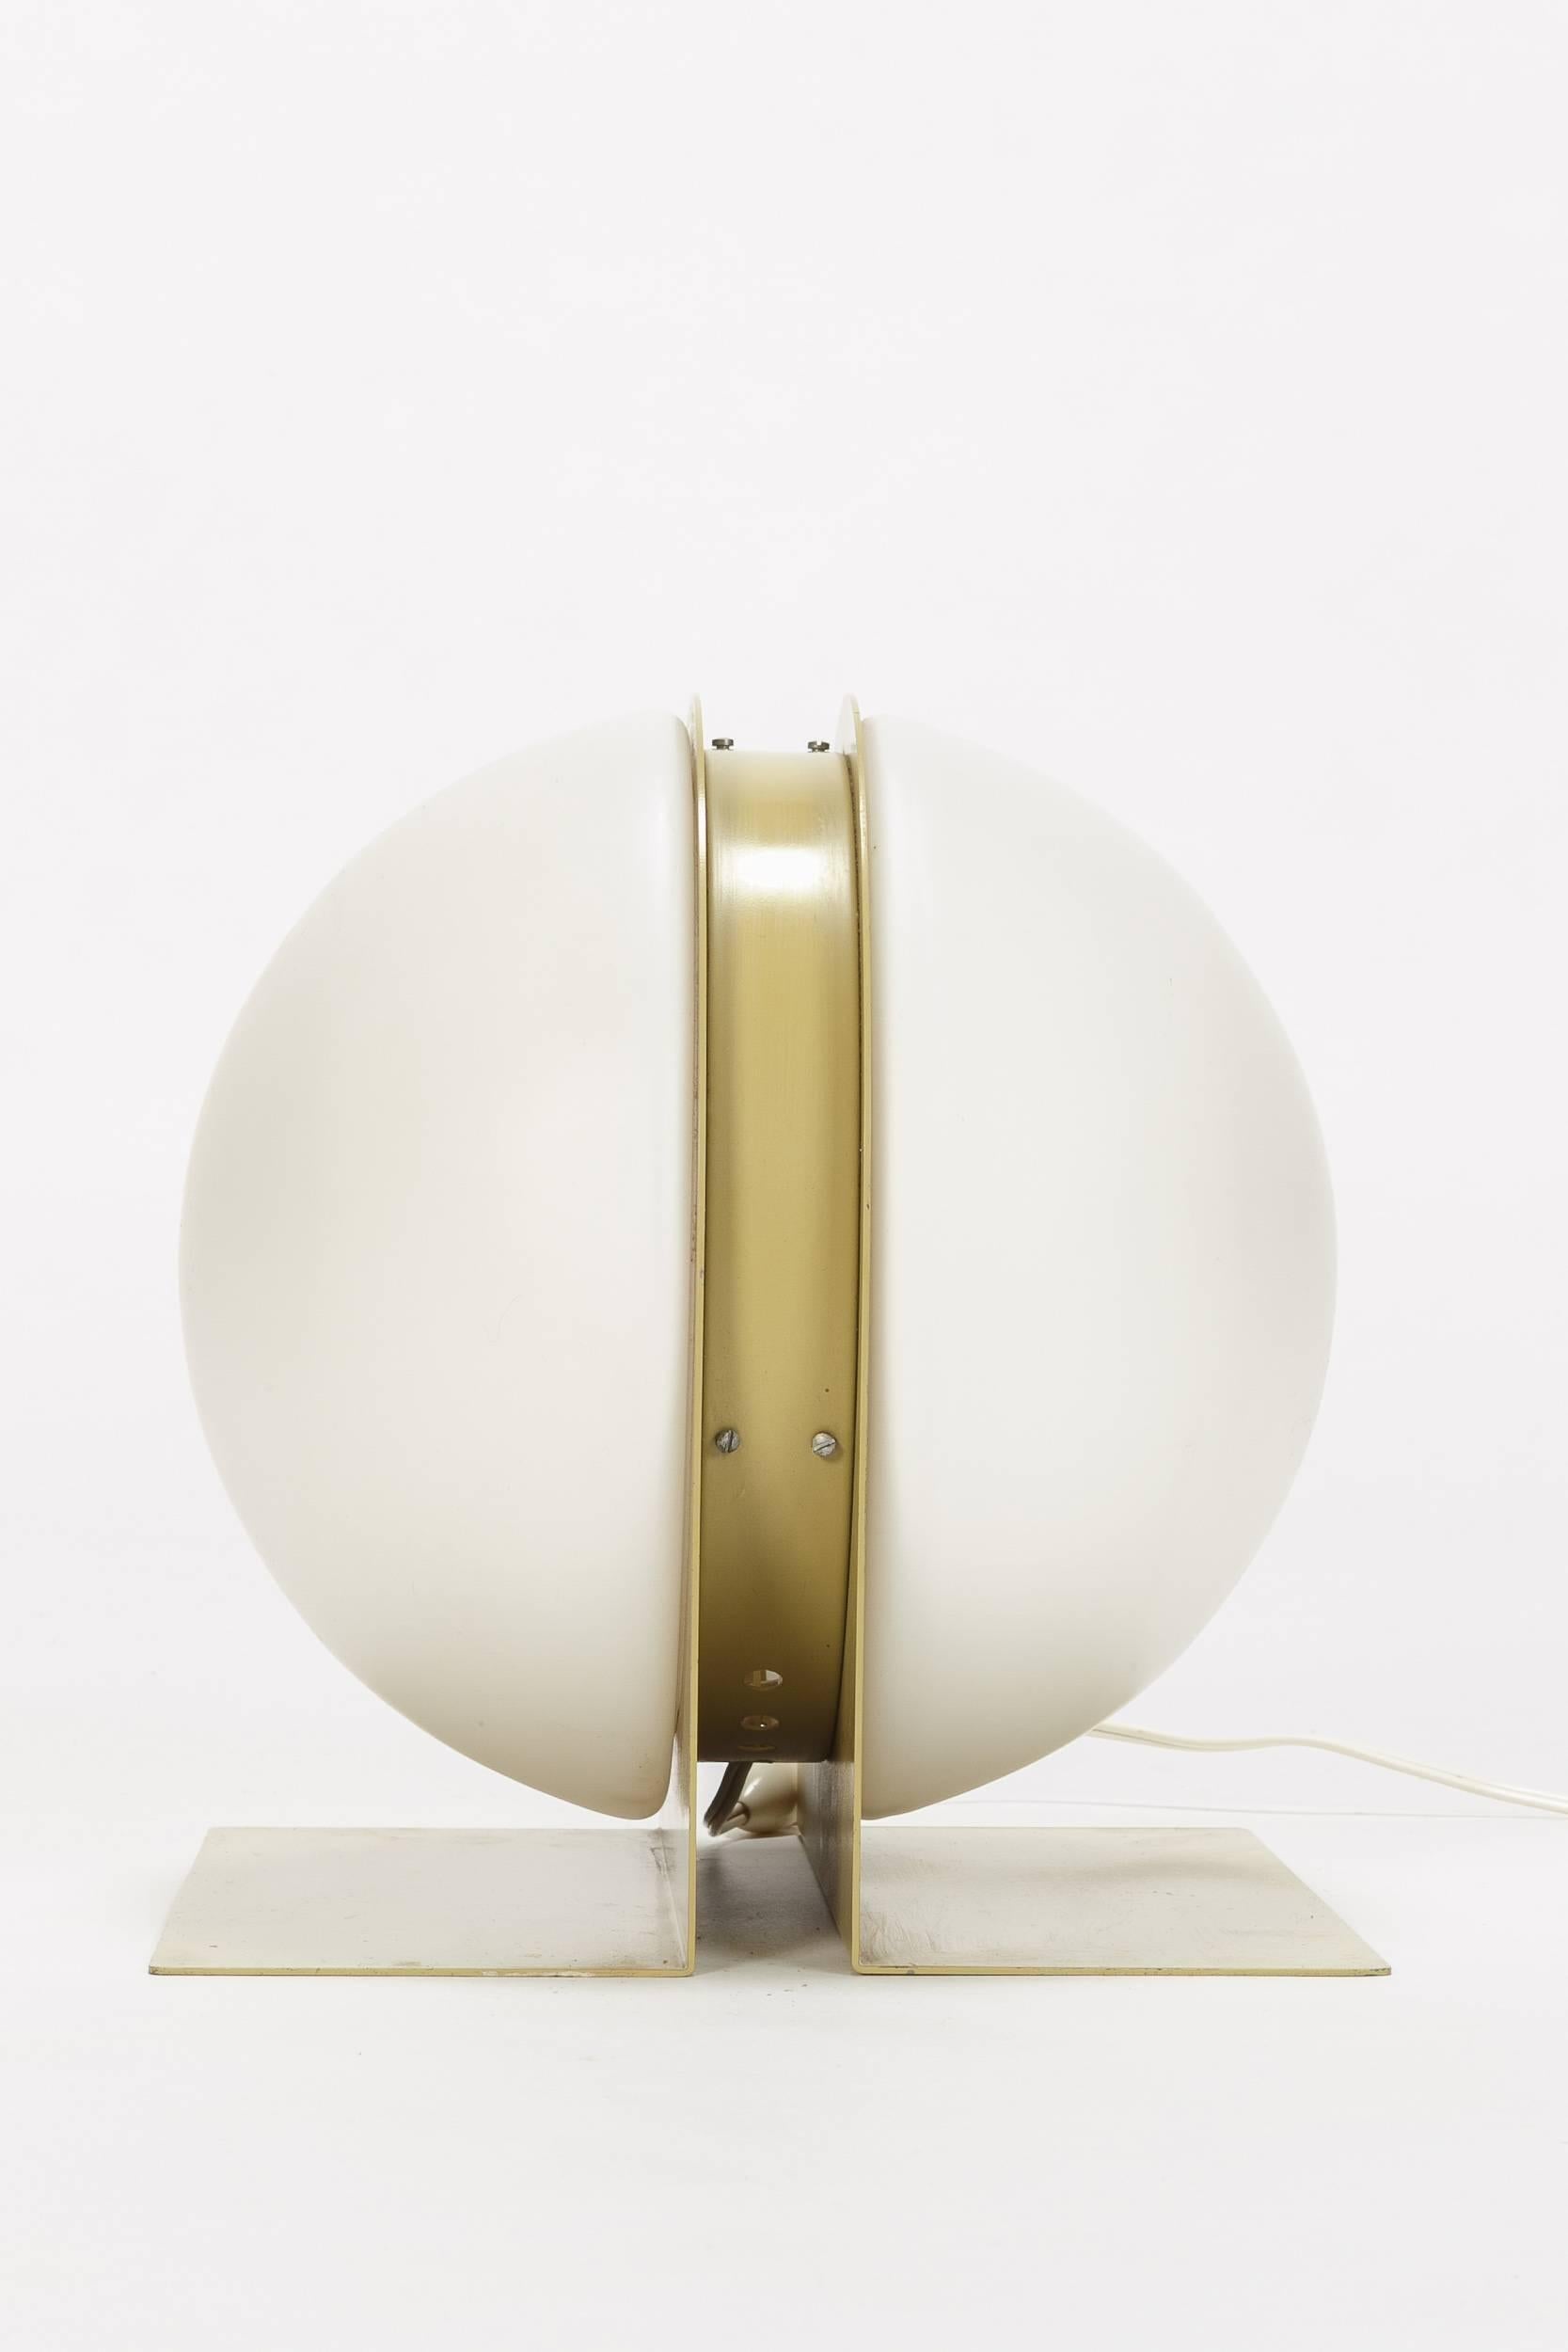 Very rare Ben Swildens table lamp designed for the French manufacturer Verre Lumie`re in 1970. The offered model 10445 here was designed by artistic director Ben Swildens and is made of satinated opaline glass and lacquered metal. It’s an exemplar